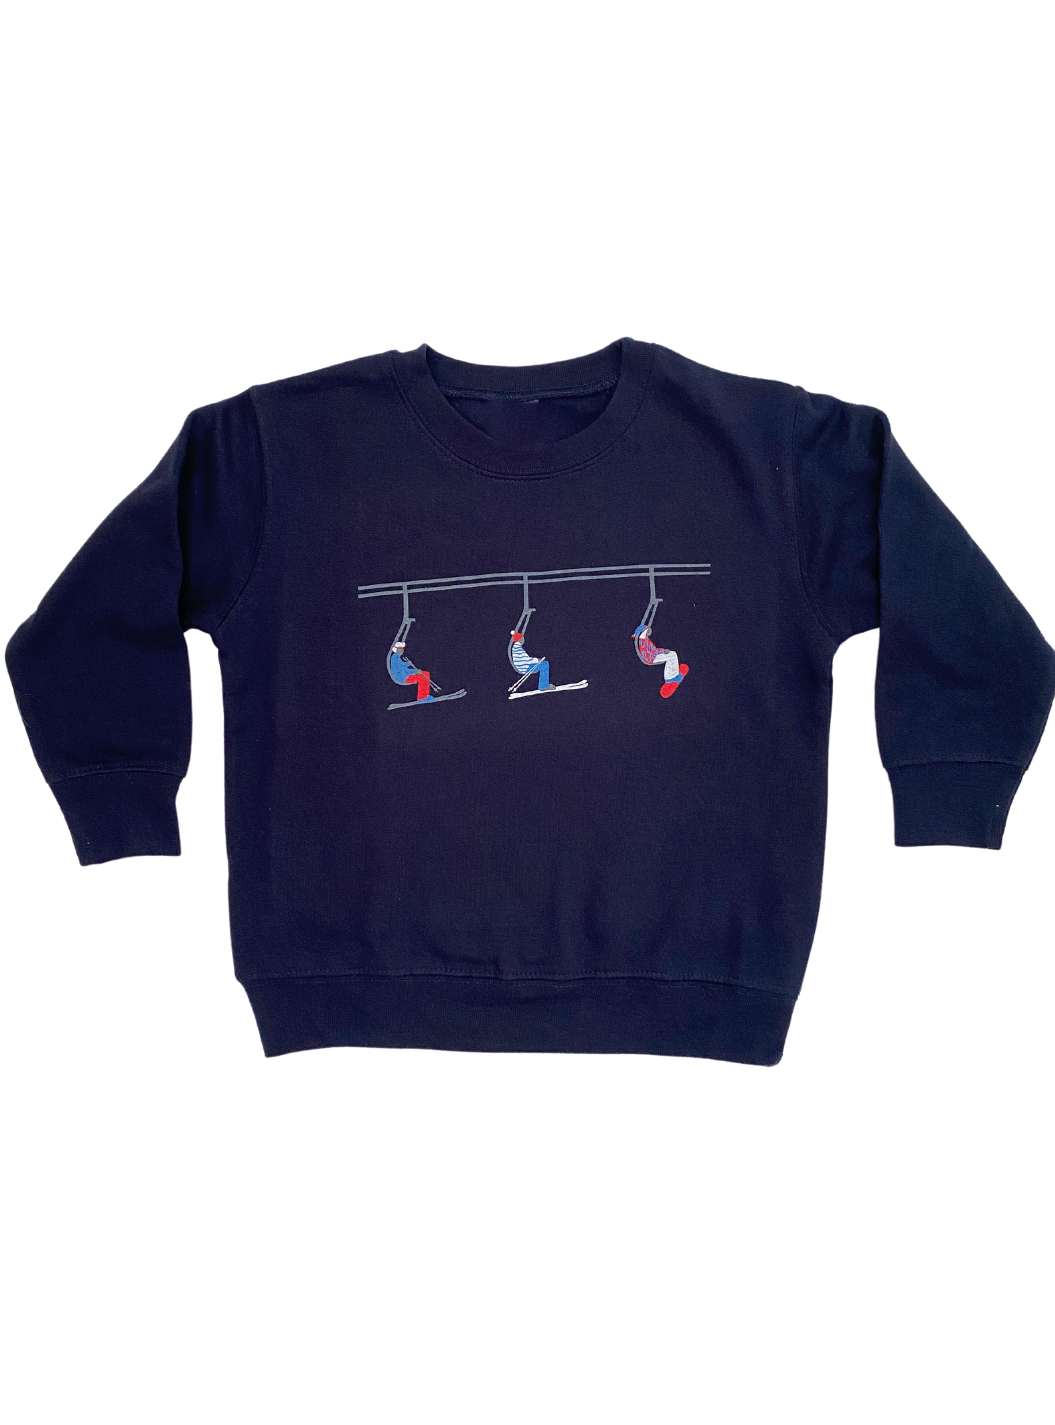 SKIER TODDLER GRAPHIC PULLOVER